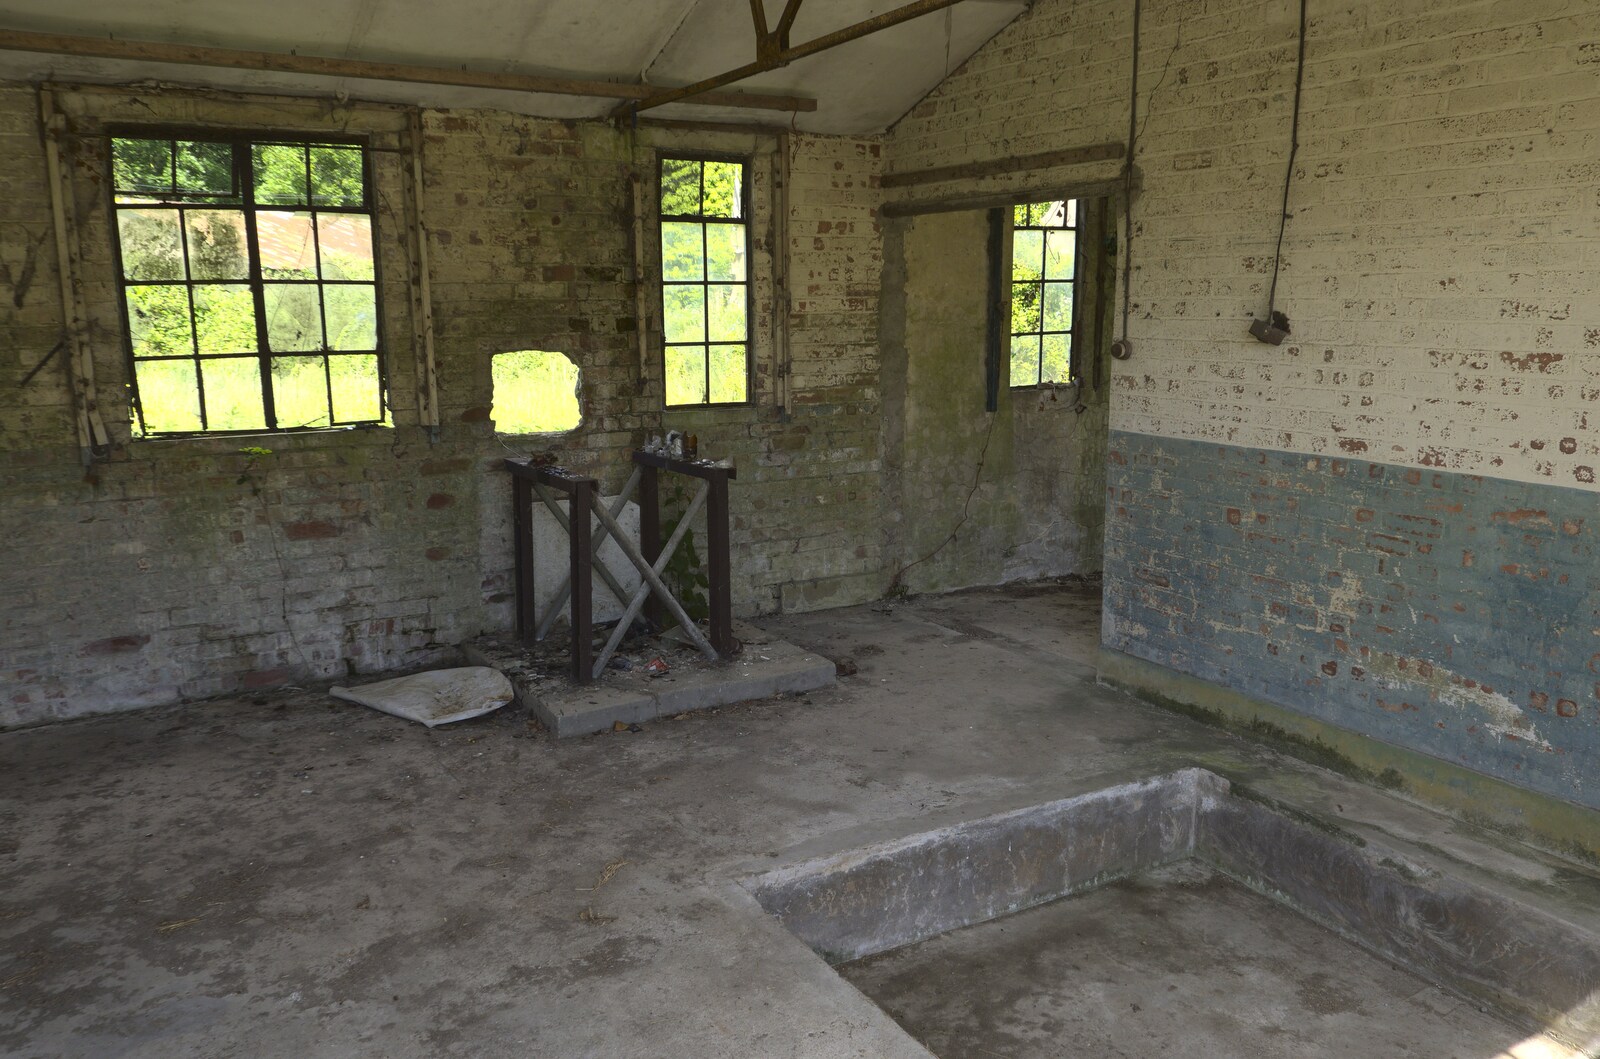 One of the maintenance sheds from A 1940s Timewarp, Site 4, Bungay Airfield, Flixton, Suffolk - 9th June 2022